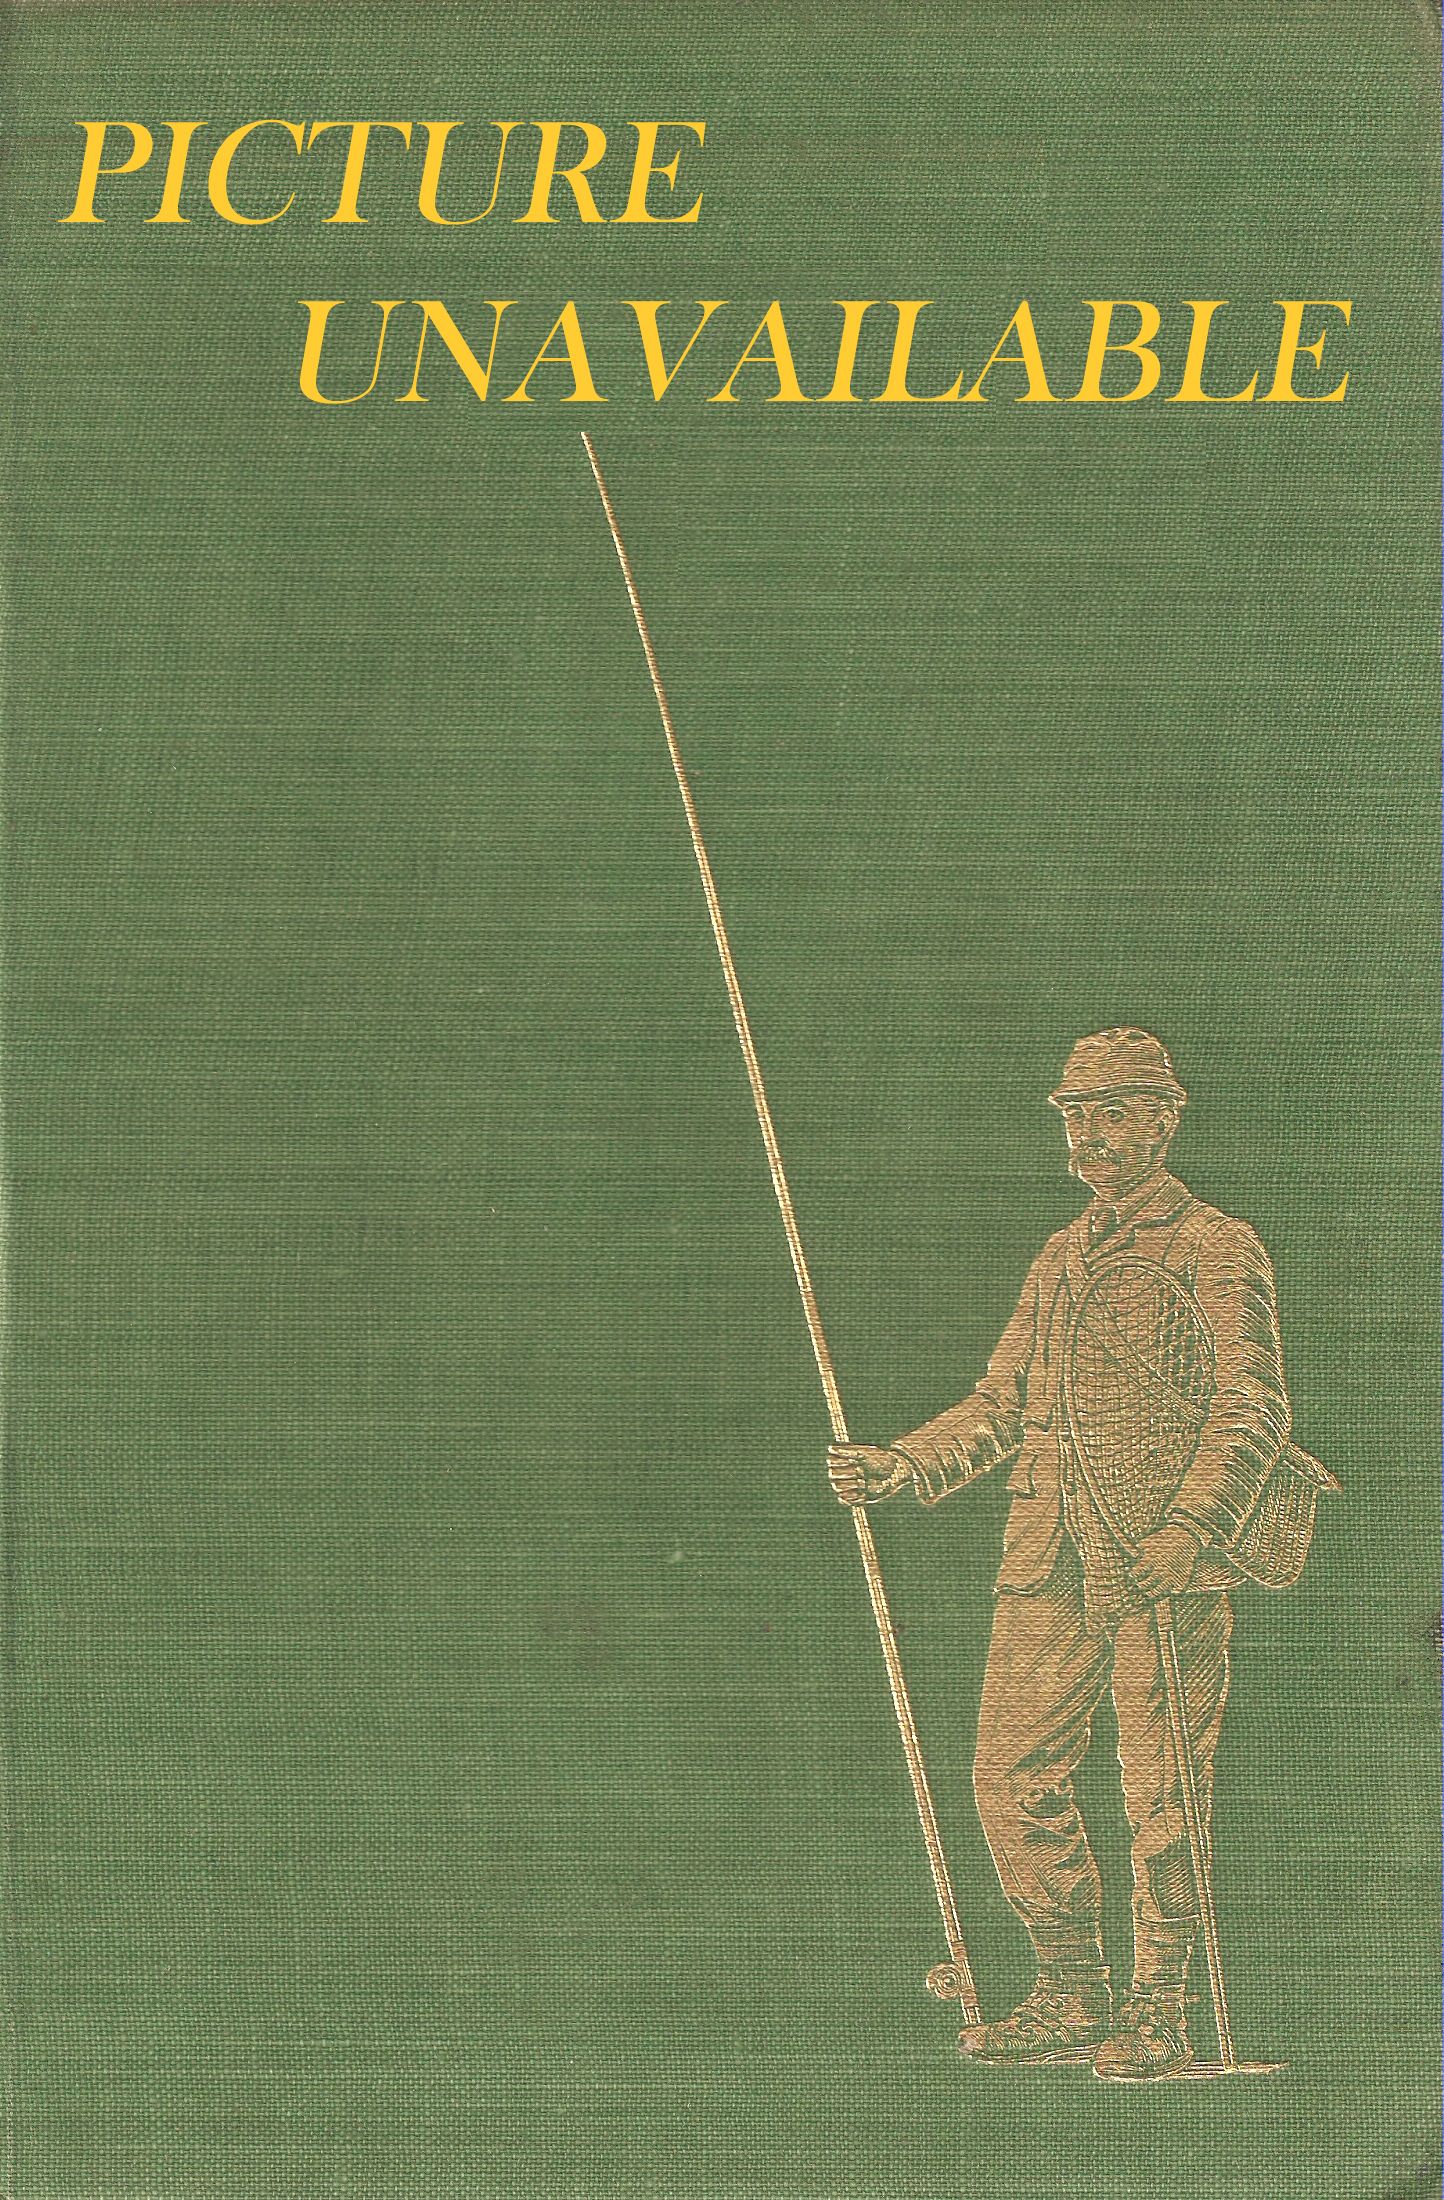 A HISTORY OF FLY FISHING FOR TROUT. By John Waller Hills. First edition.